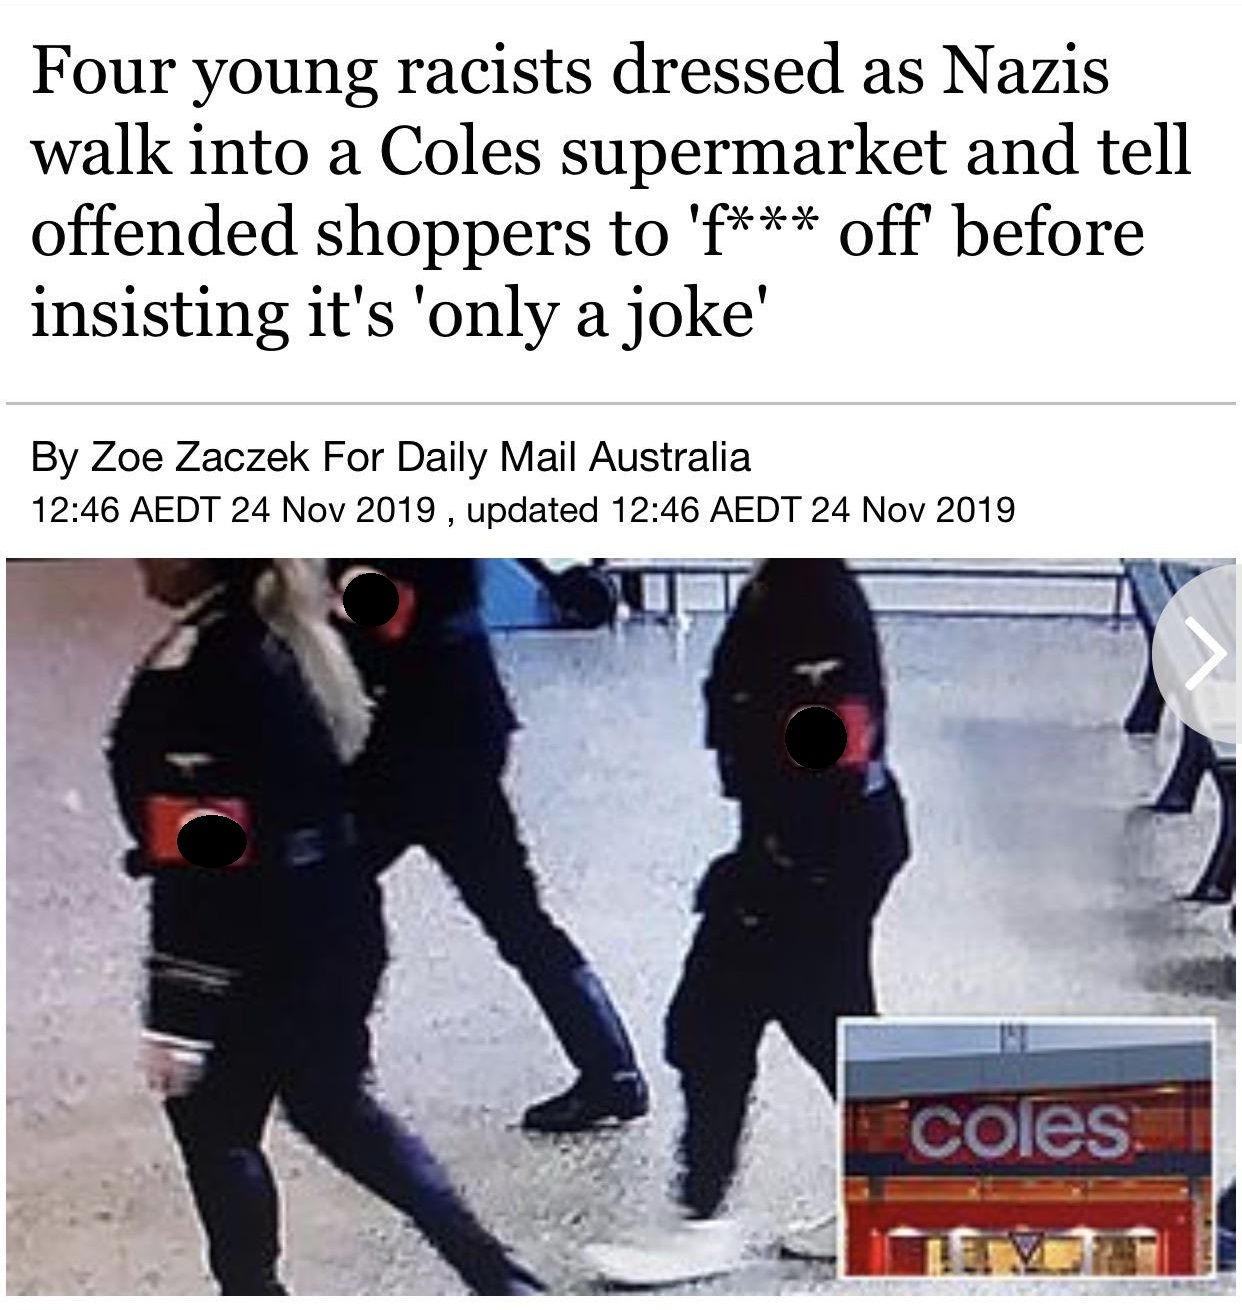 nazi coles - Four young racists dressed as Nazis walk into a Coles supermarket and tell offended shoppers to ' off before insisting it's 'only a joke' By Zoe Zaczek For Daily Mail Australia Aedt , updated Aedt coles